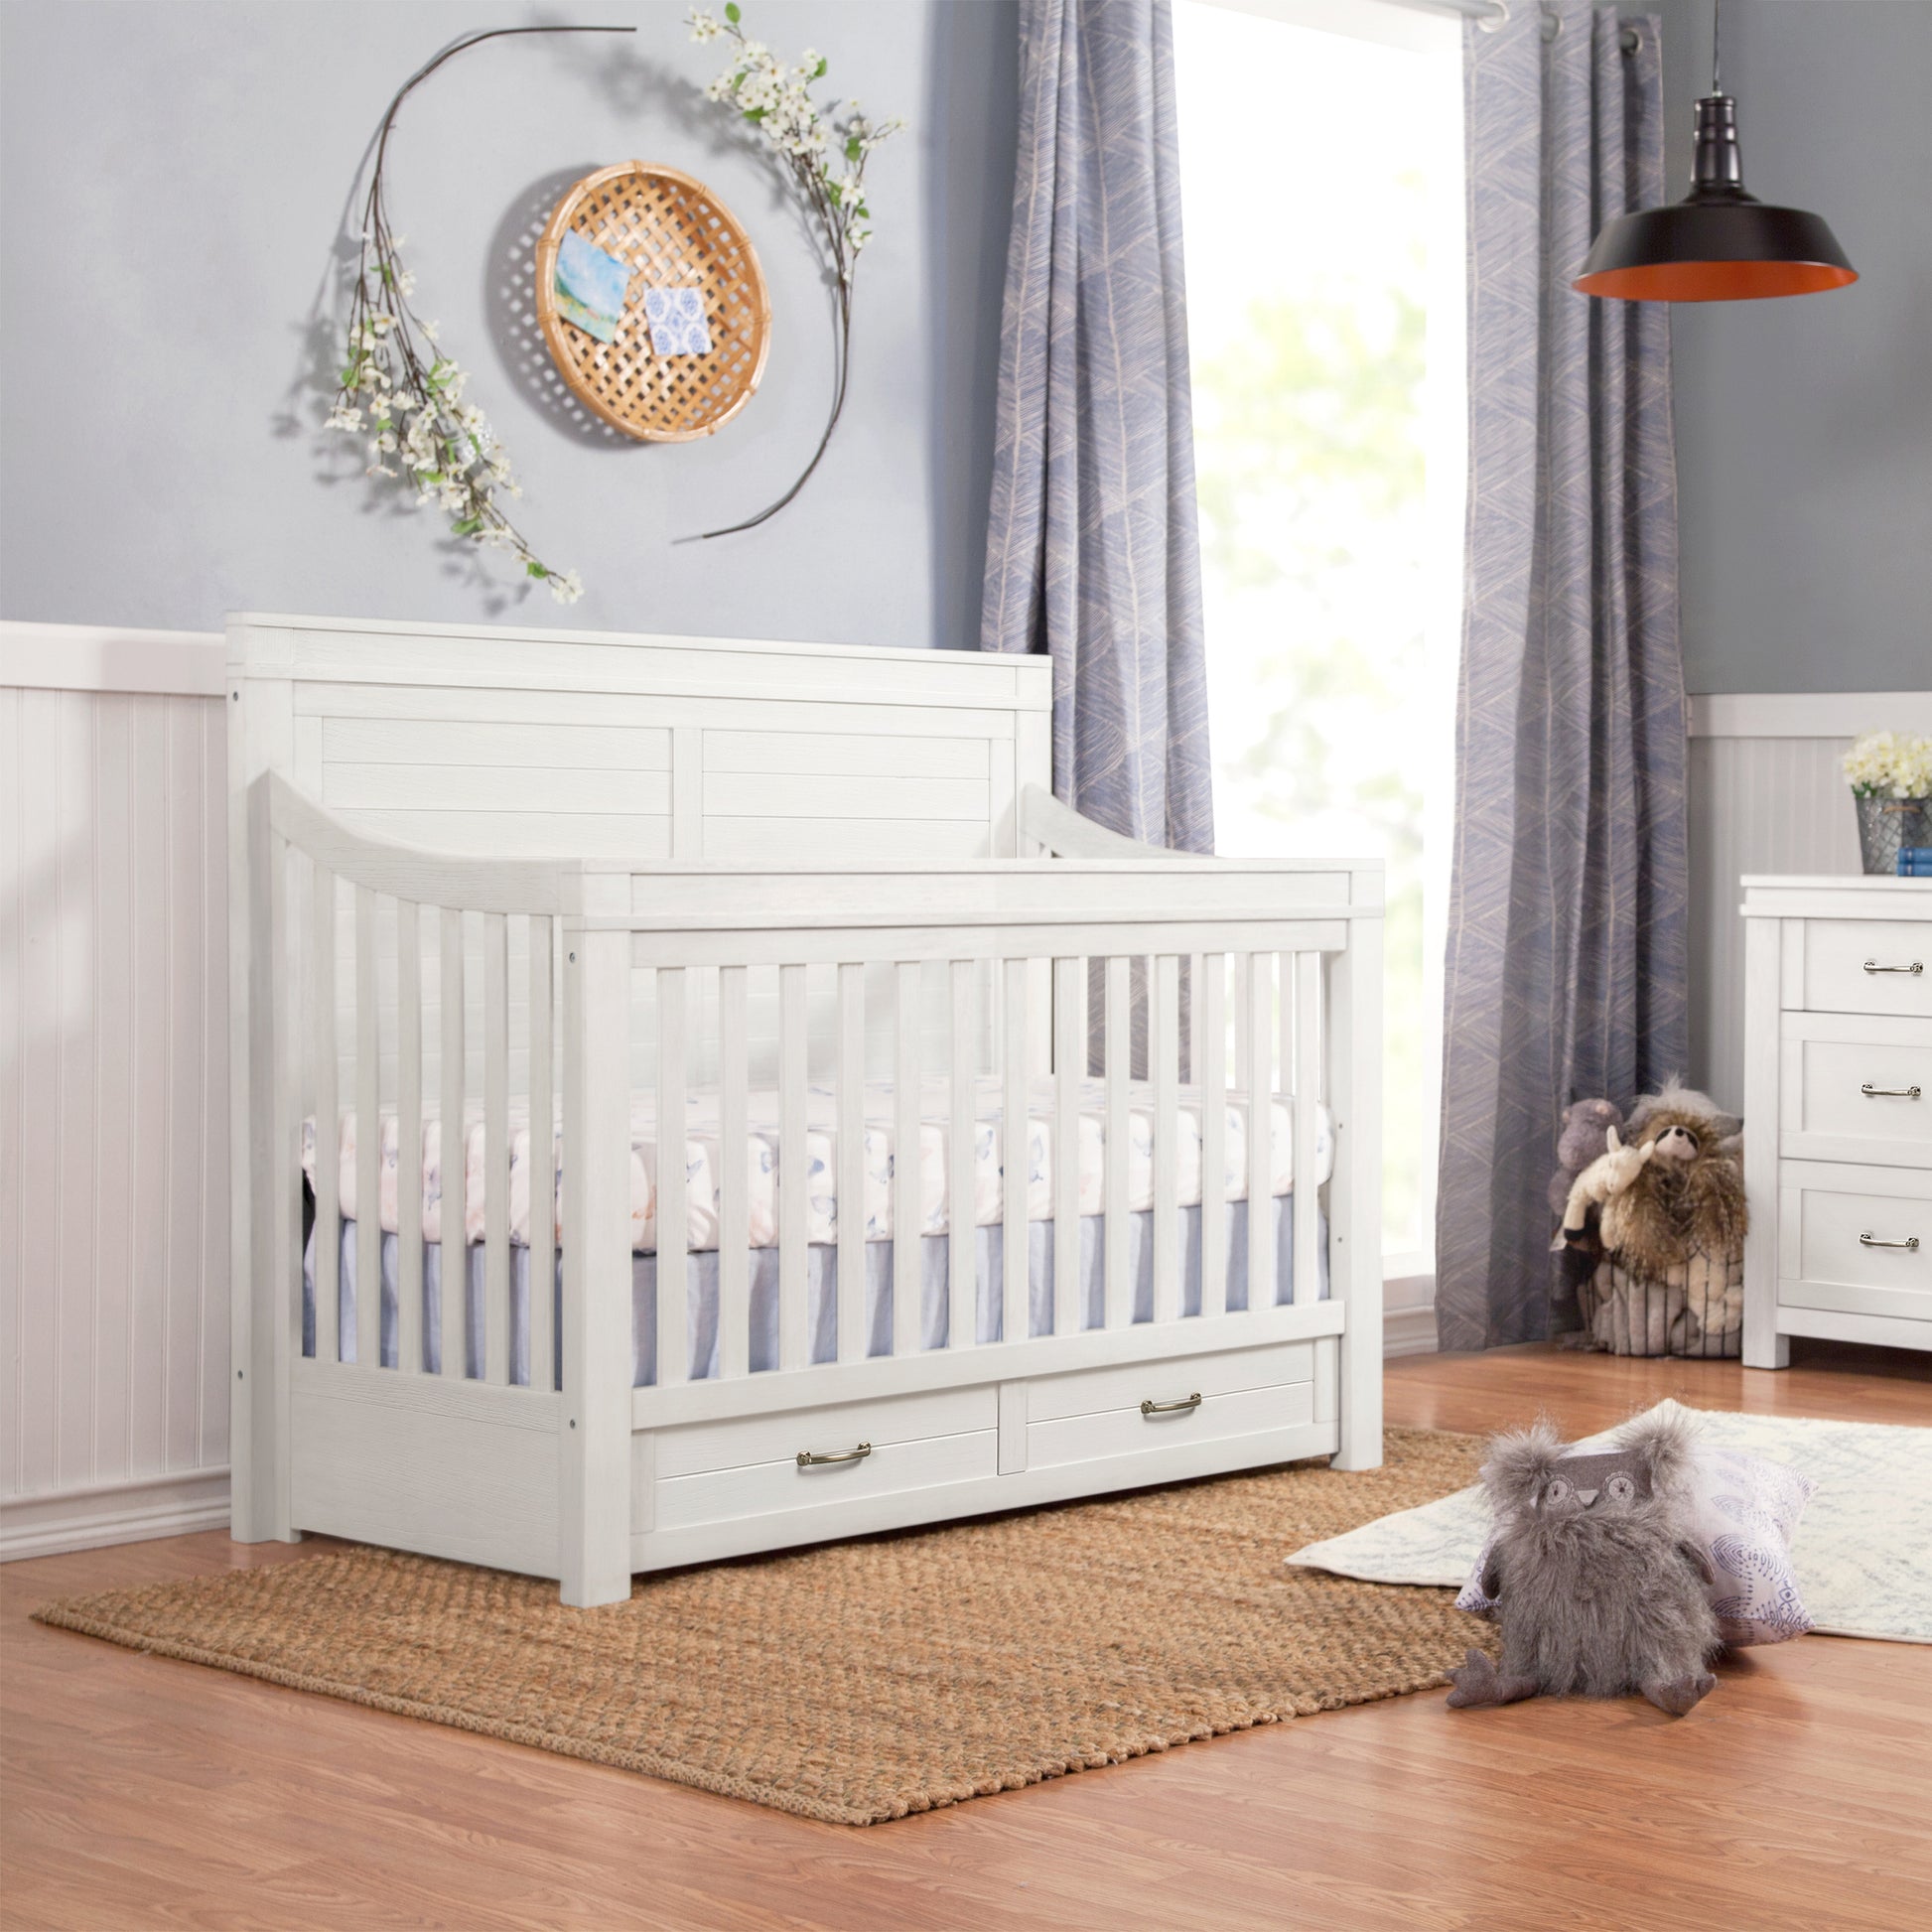 M21101HW,Wesley Farmhouse 4-in-1 Convertible Crib in Heirloom White